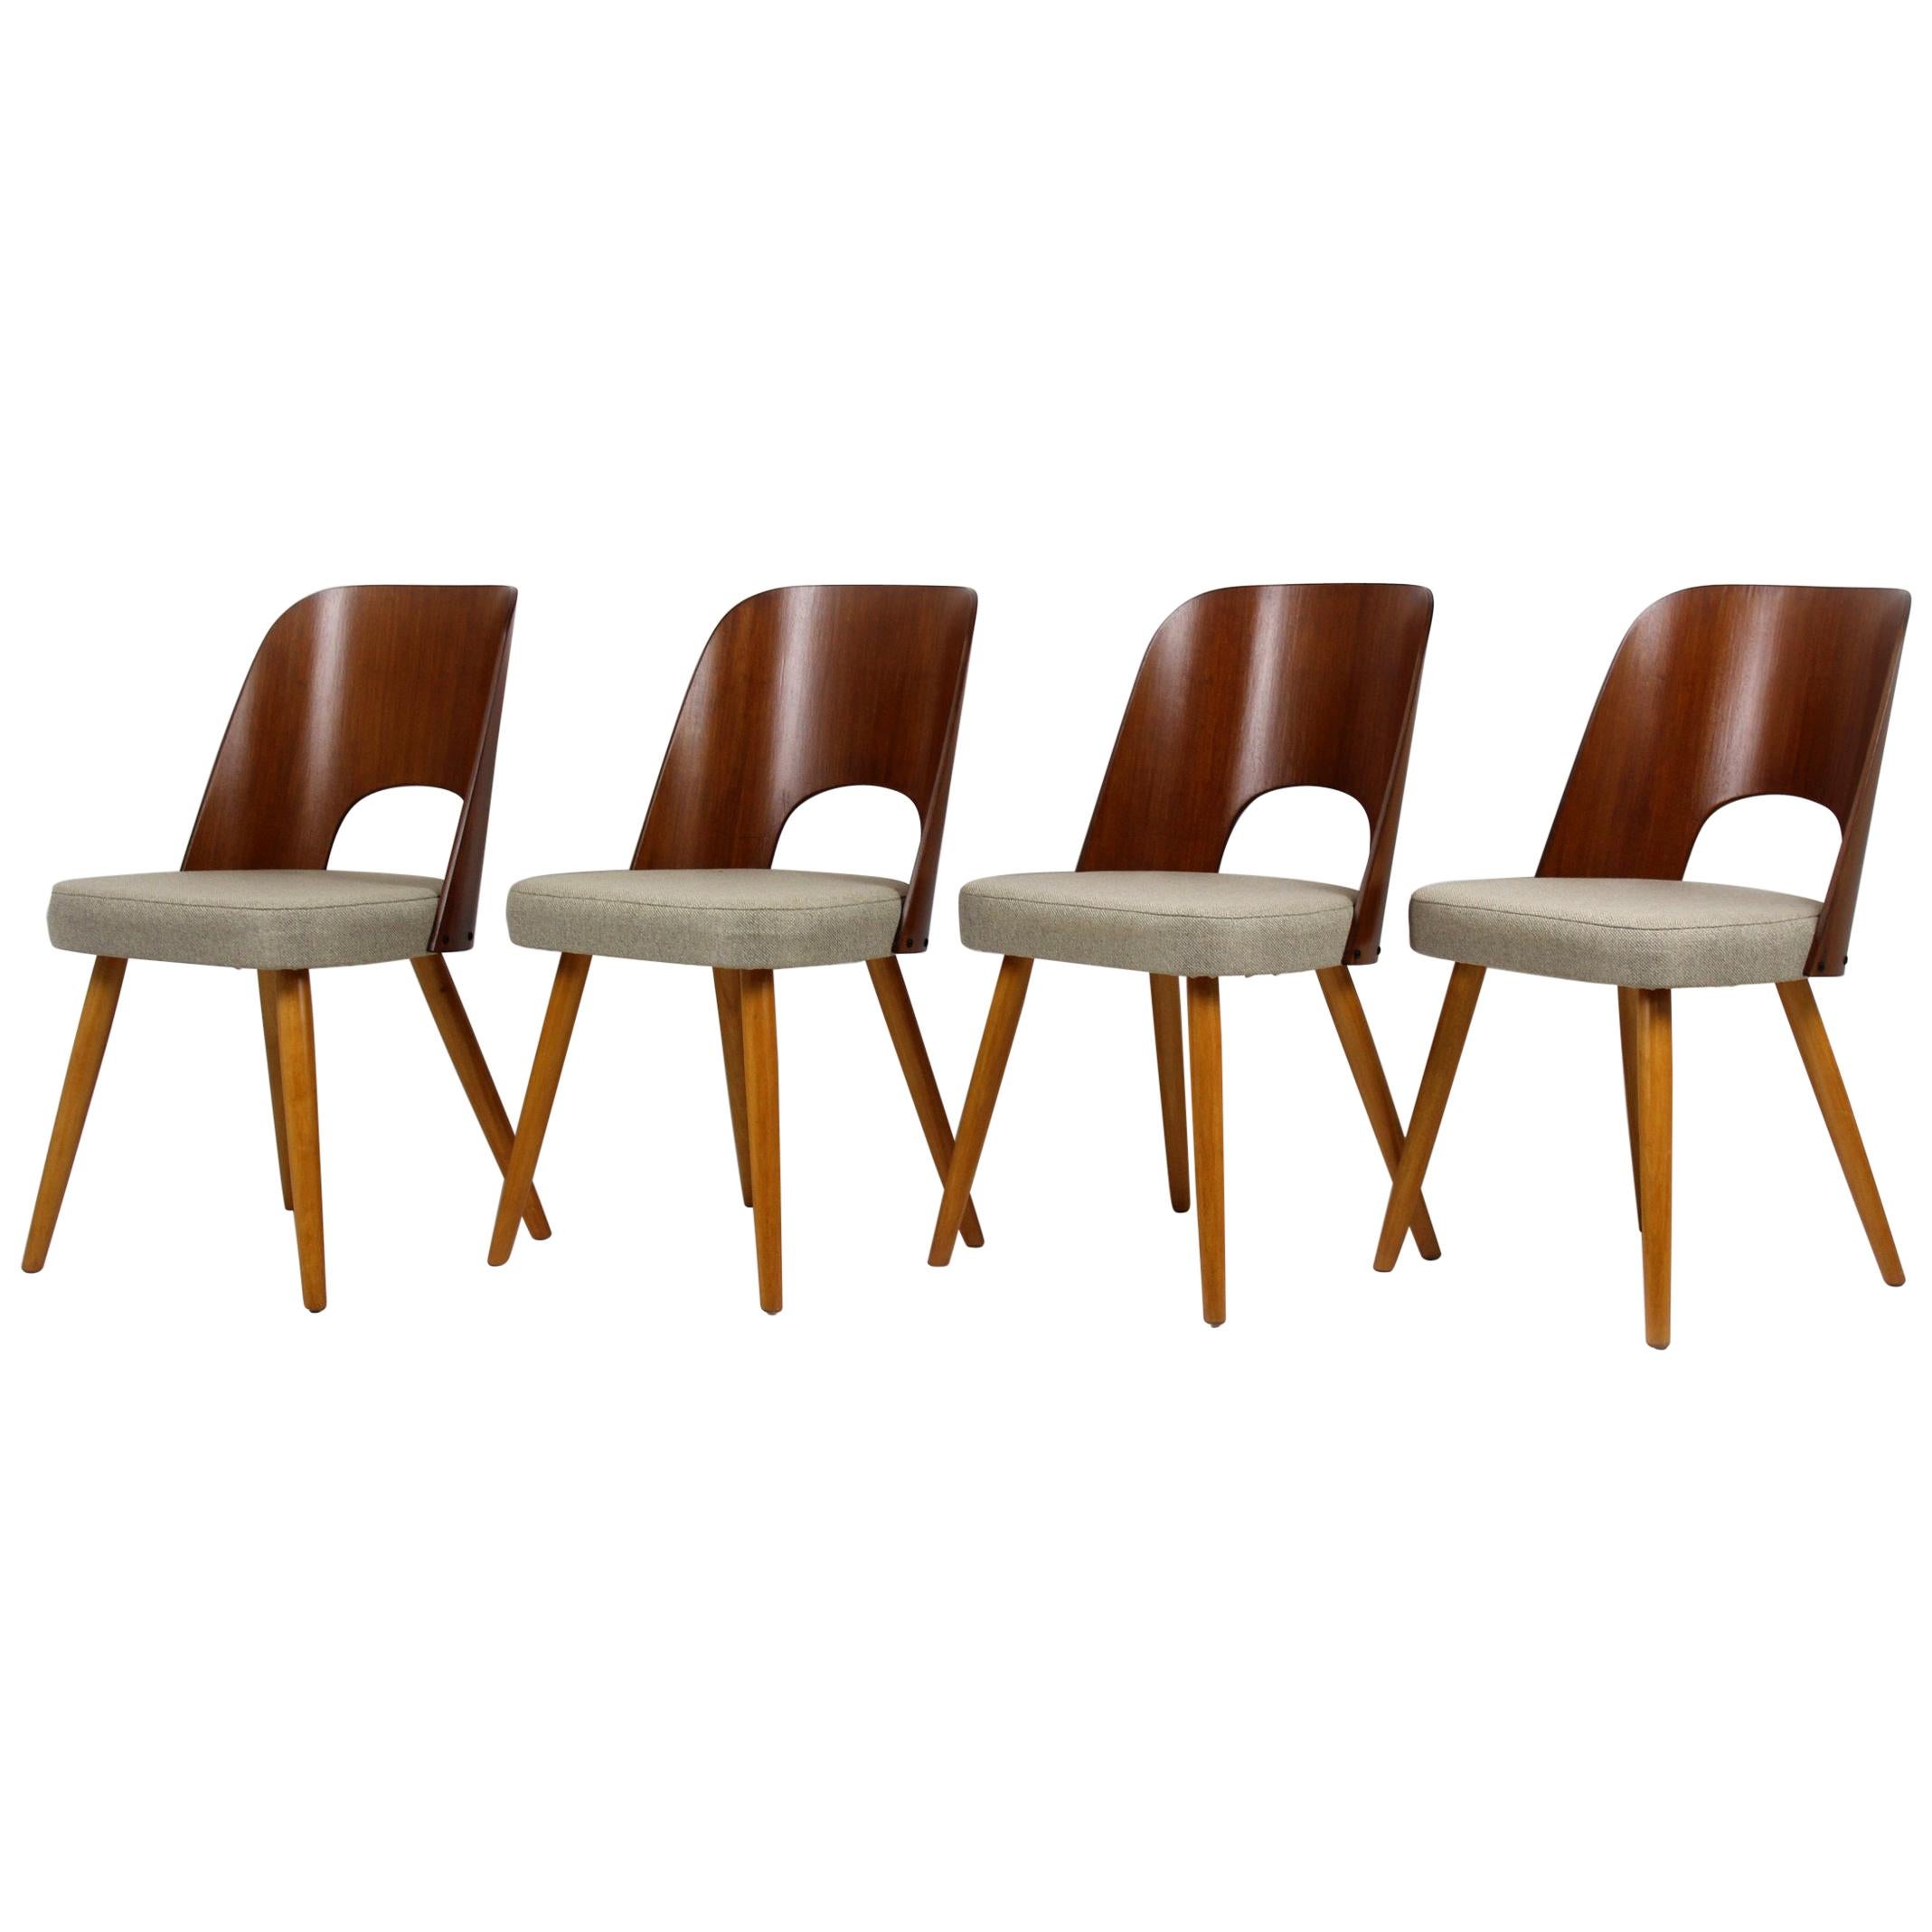 Dining Chairs by Oswald Haerdtl for Tatra, 1960s, Set of Four